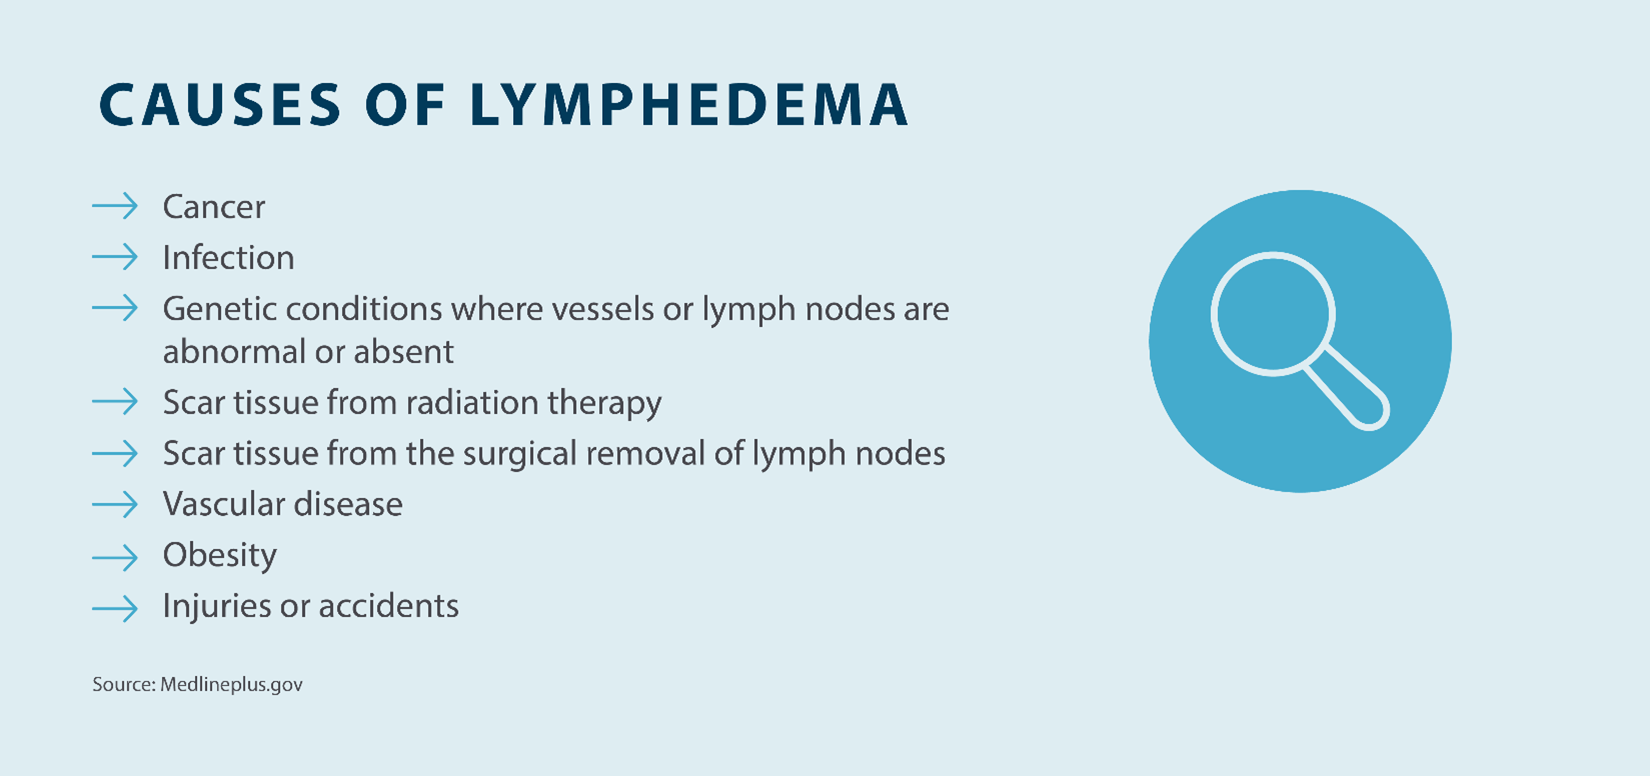 causes of lymphedema: cancer, infection, genetic conditions where vessels or lymph nodes are abnormal or absent, scar tissue from radiation therapy, scar tissues from the surgical removal lymph nodes, vascular disease, obesity, injuries or accidents,